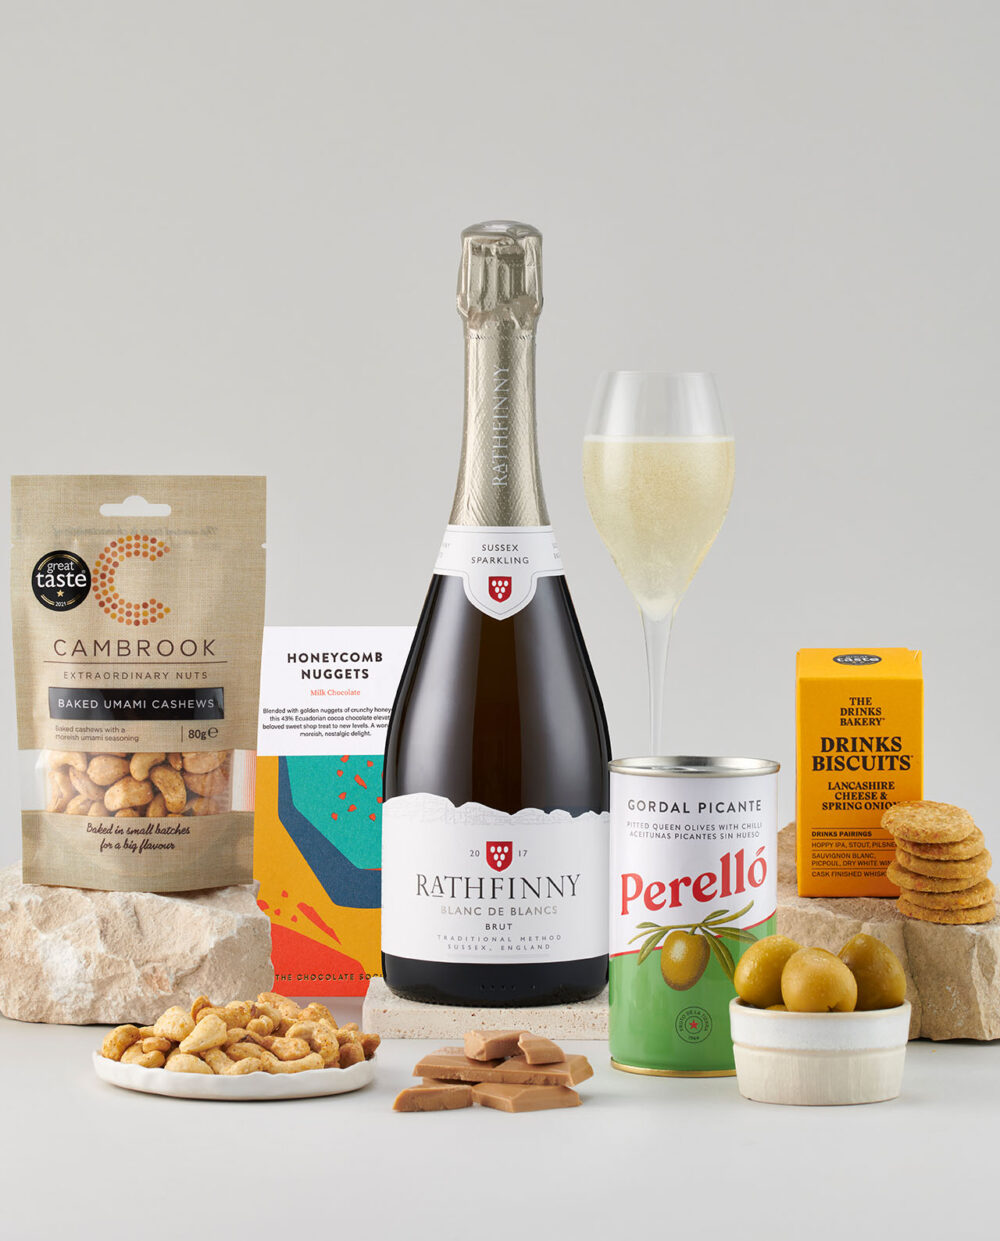 Bottle of Blanc de Blancs 2018 Surrounded by a Selection of Smartly Packaged Foods.